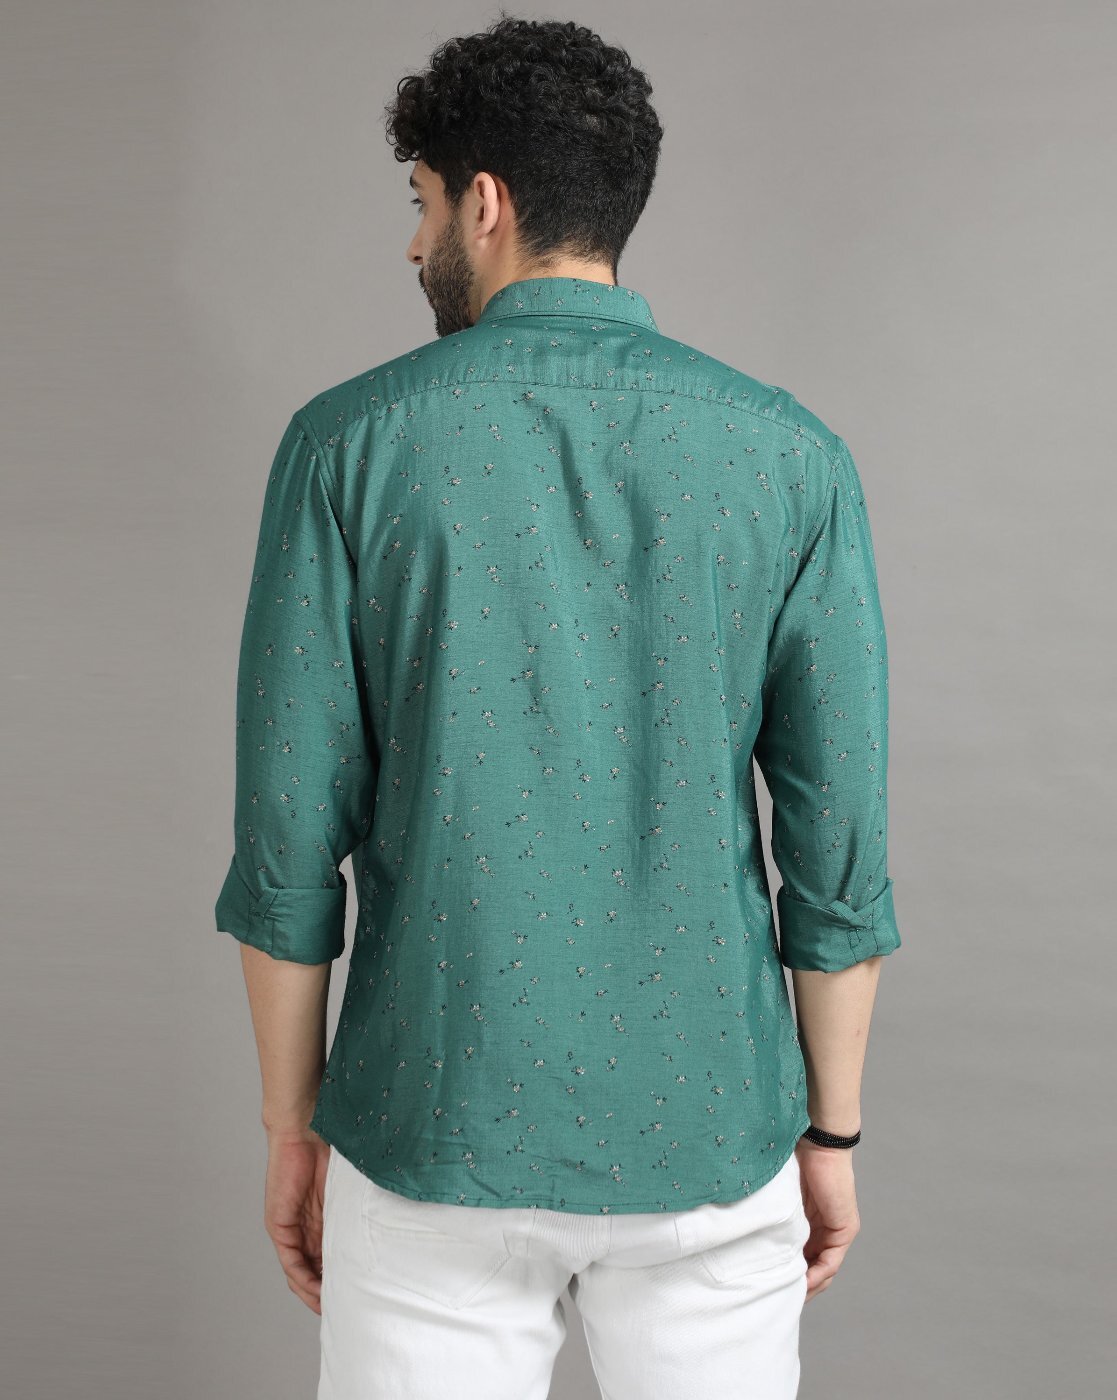 Consensus Green Shirts for Men for sale